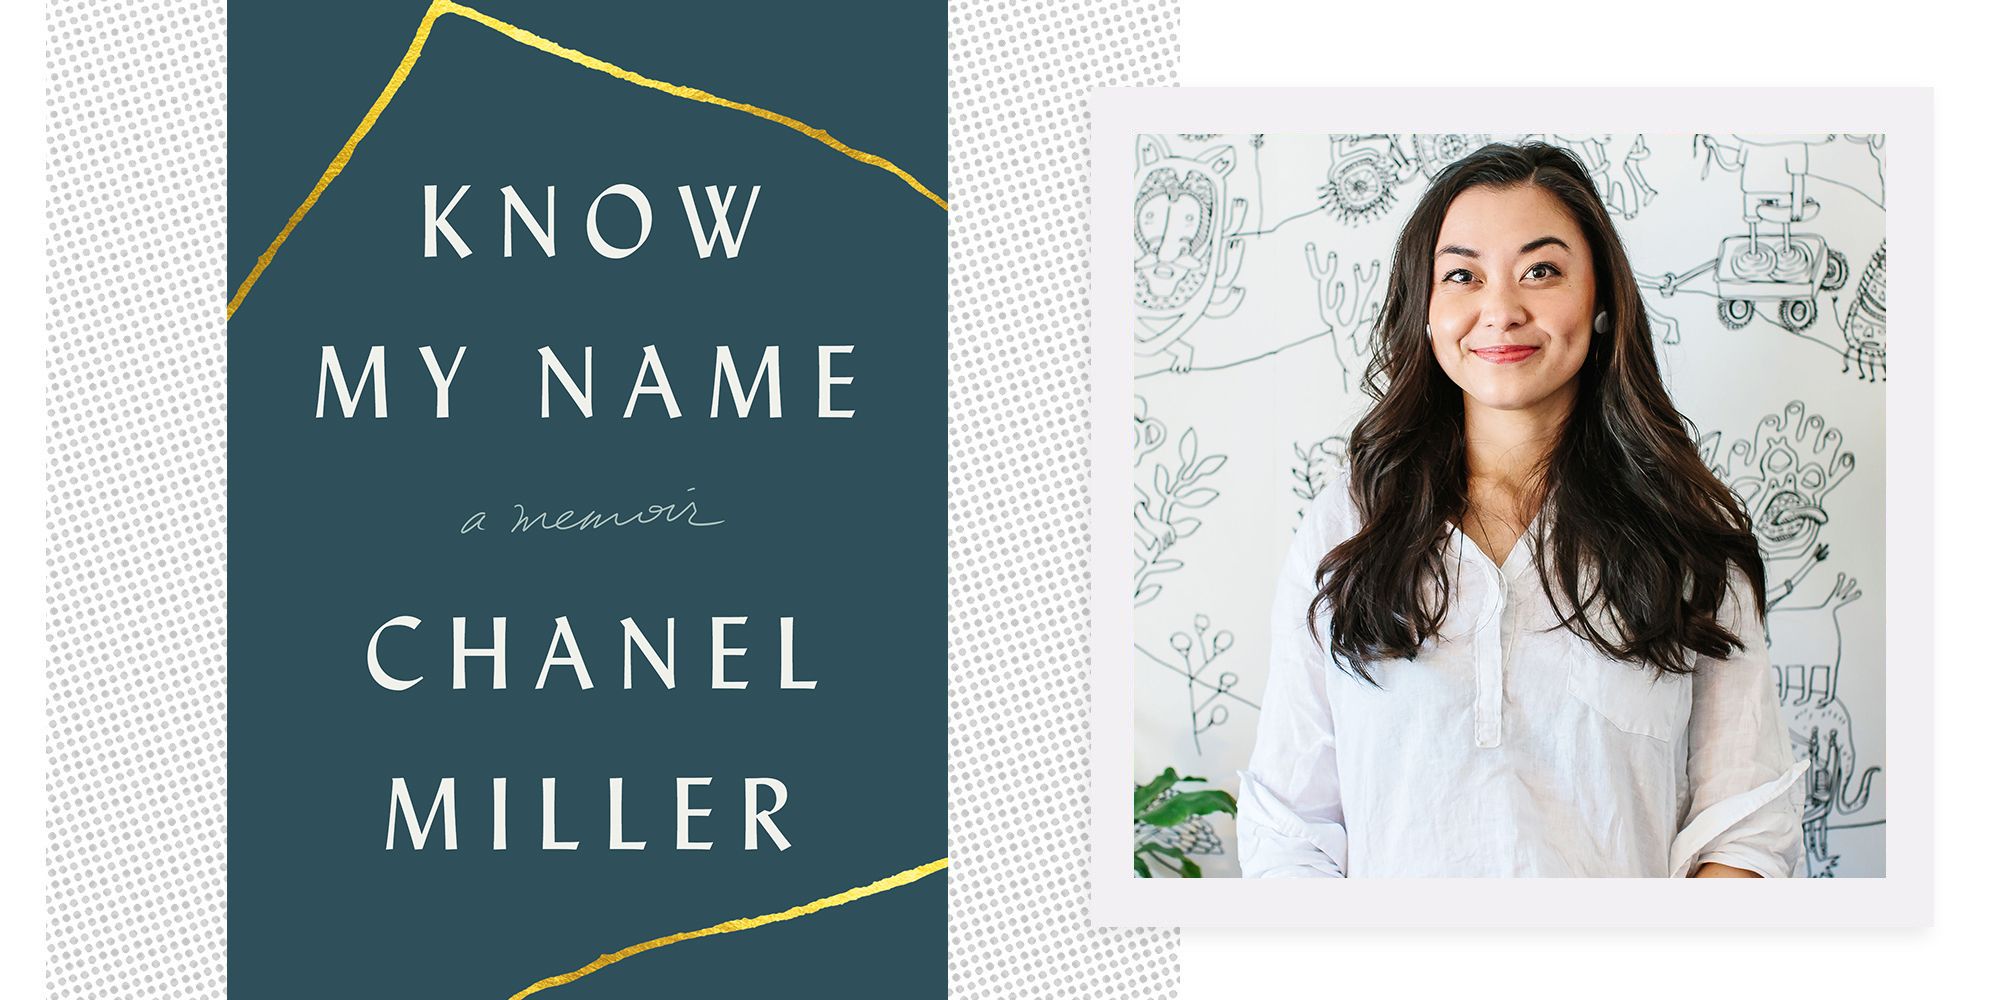 In Her Memoir 'Know My Name', Chanel Miller Reclaims Her Identity